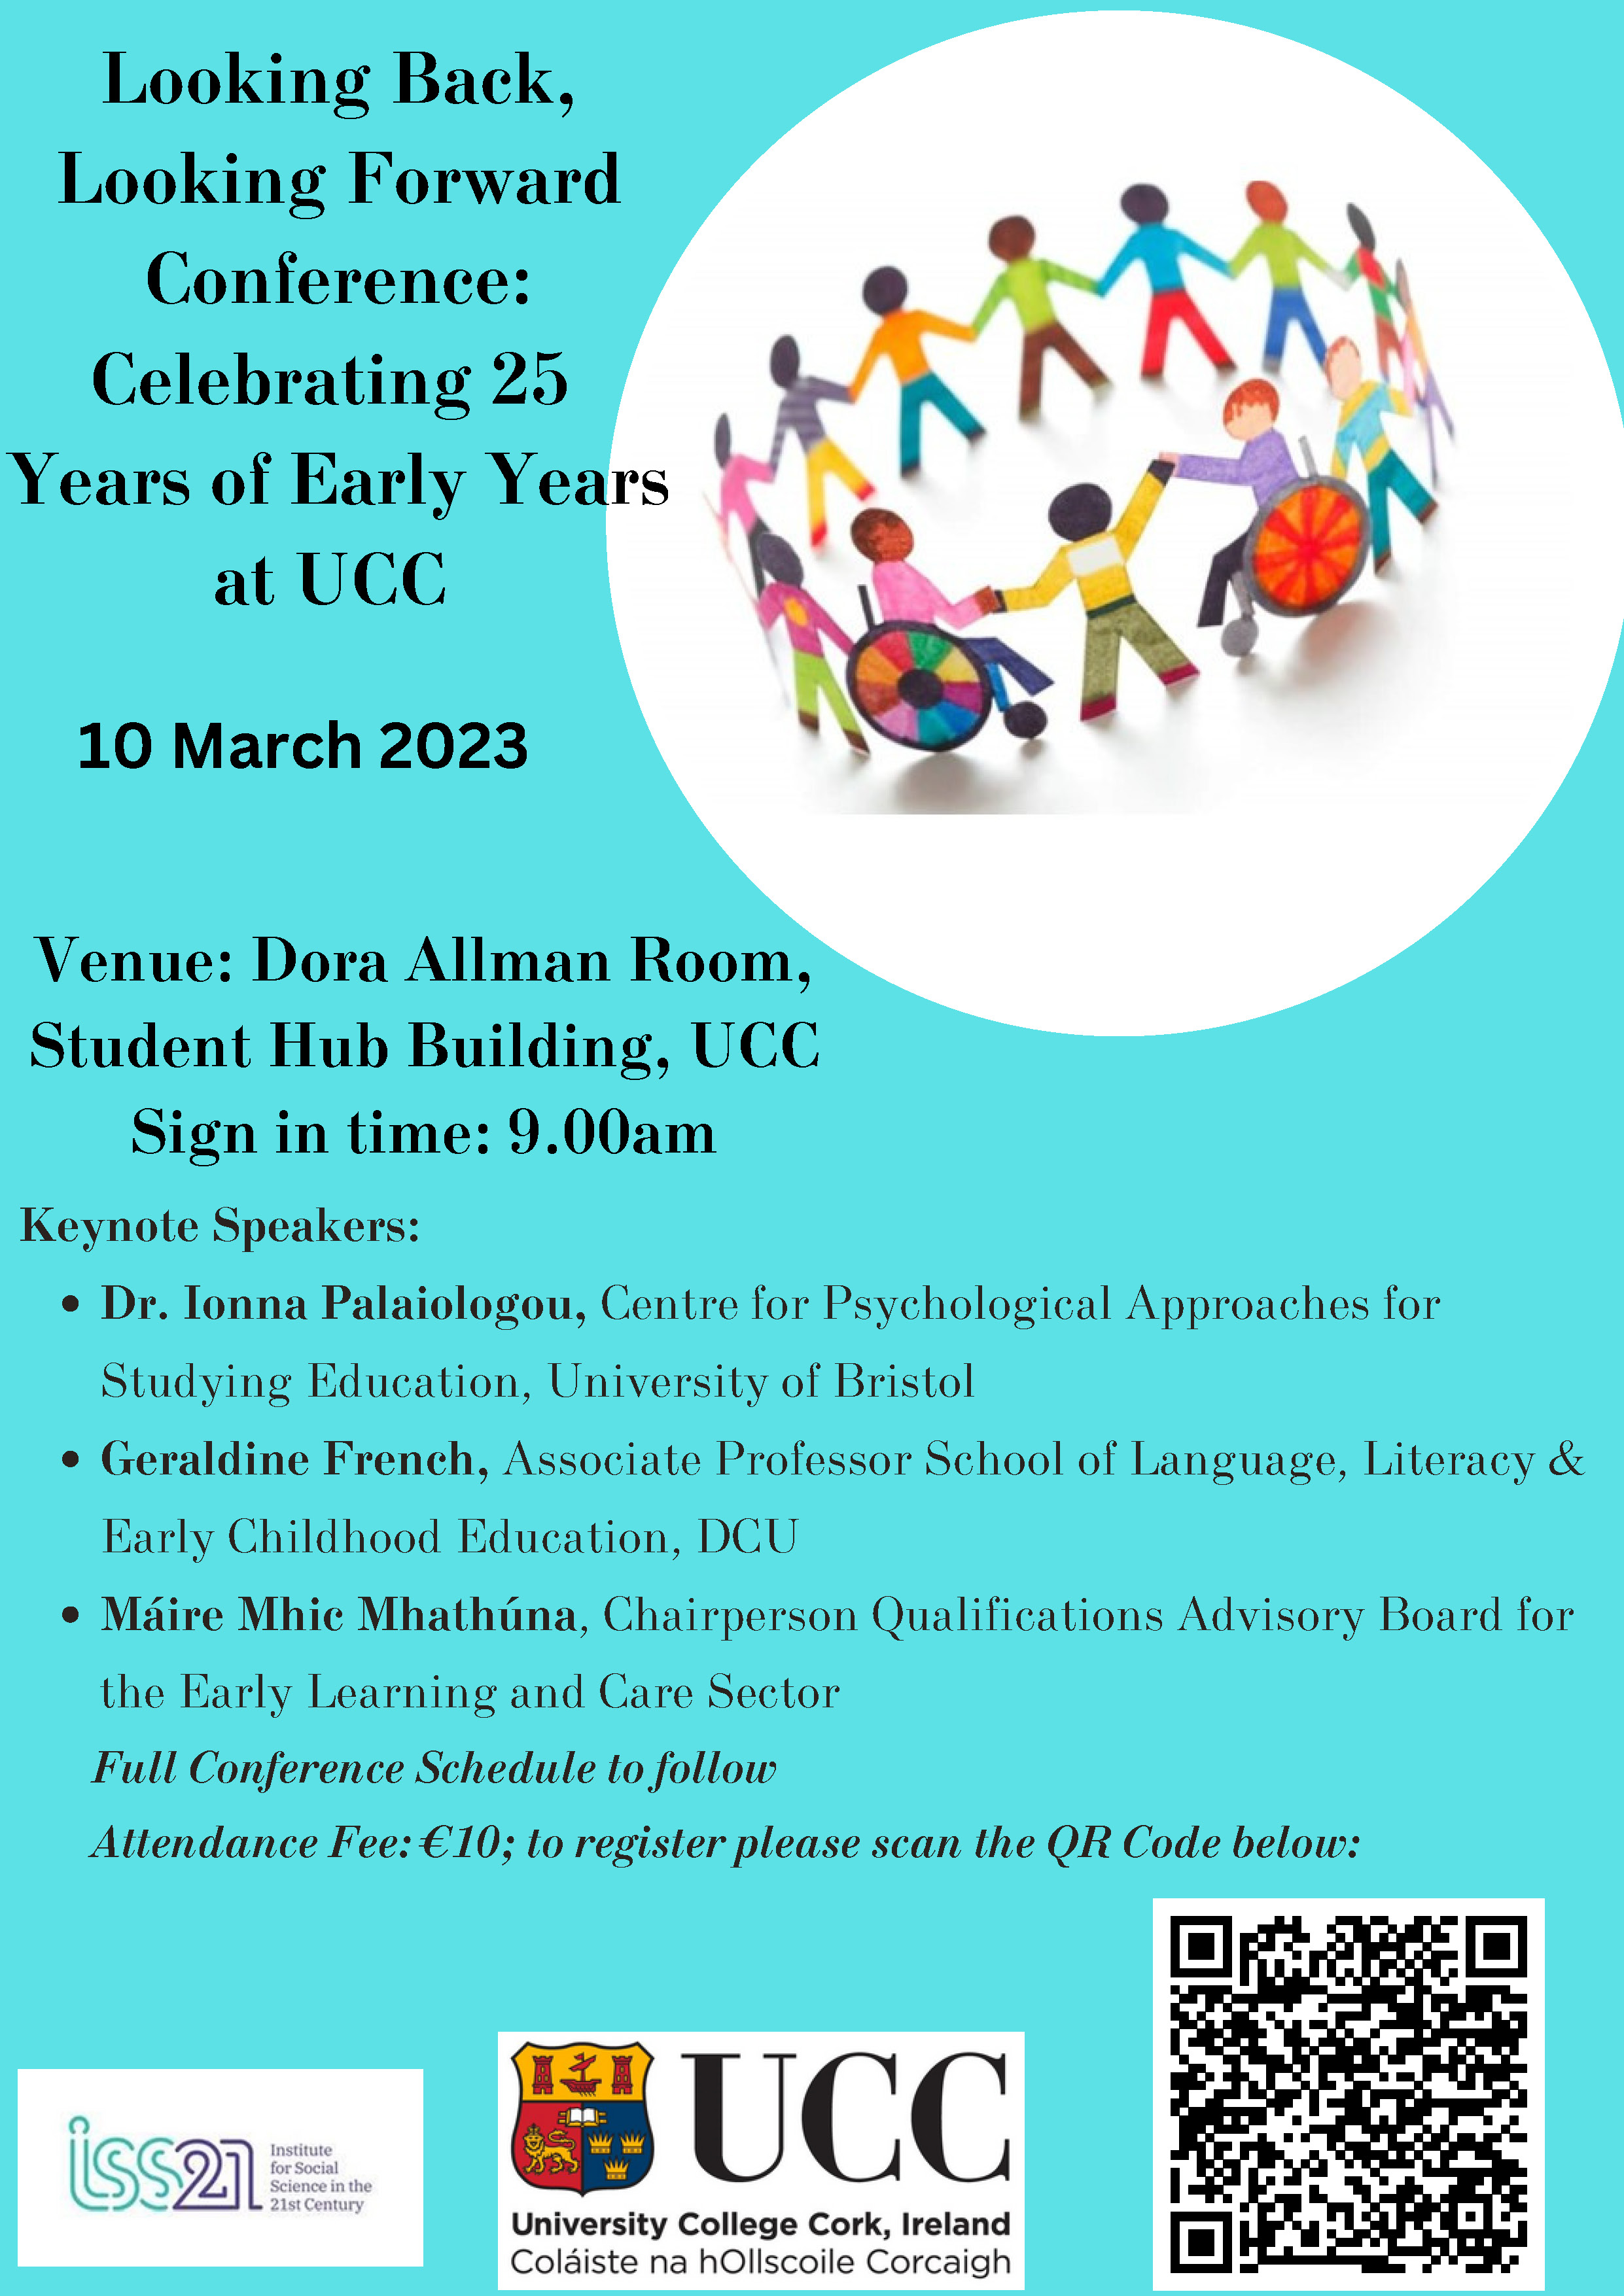 Looking Back, Looking Forward Conference: Celebrating 25 Years of Early Years at UCC 10 March 2023